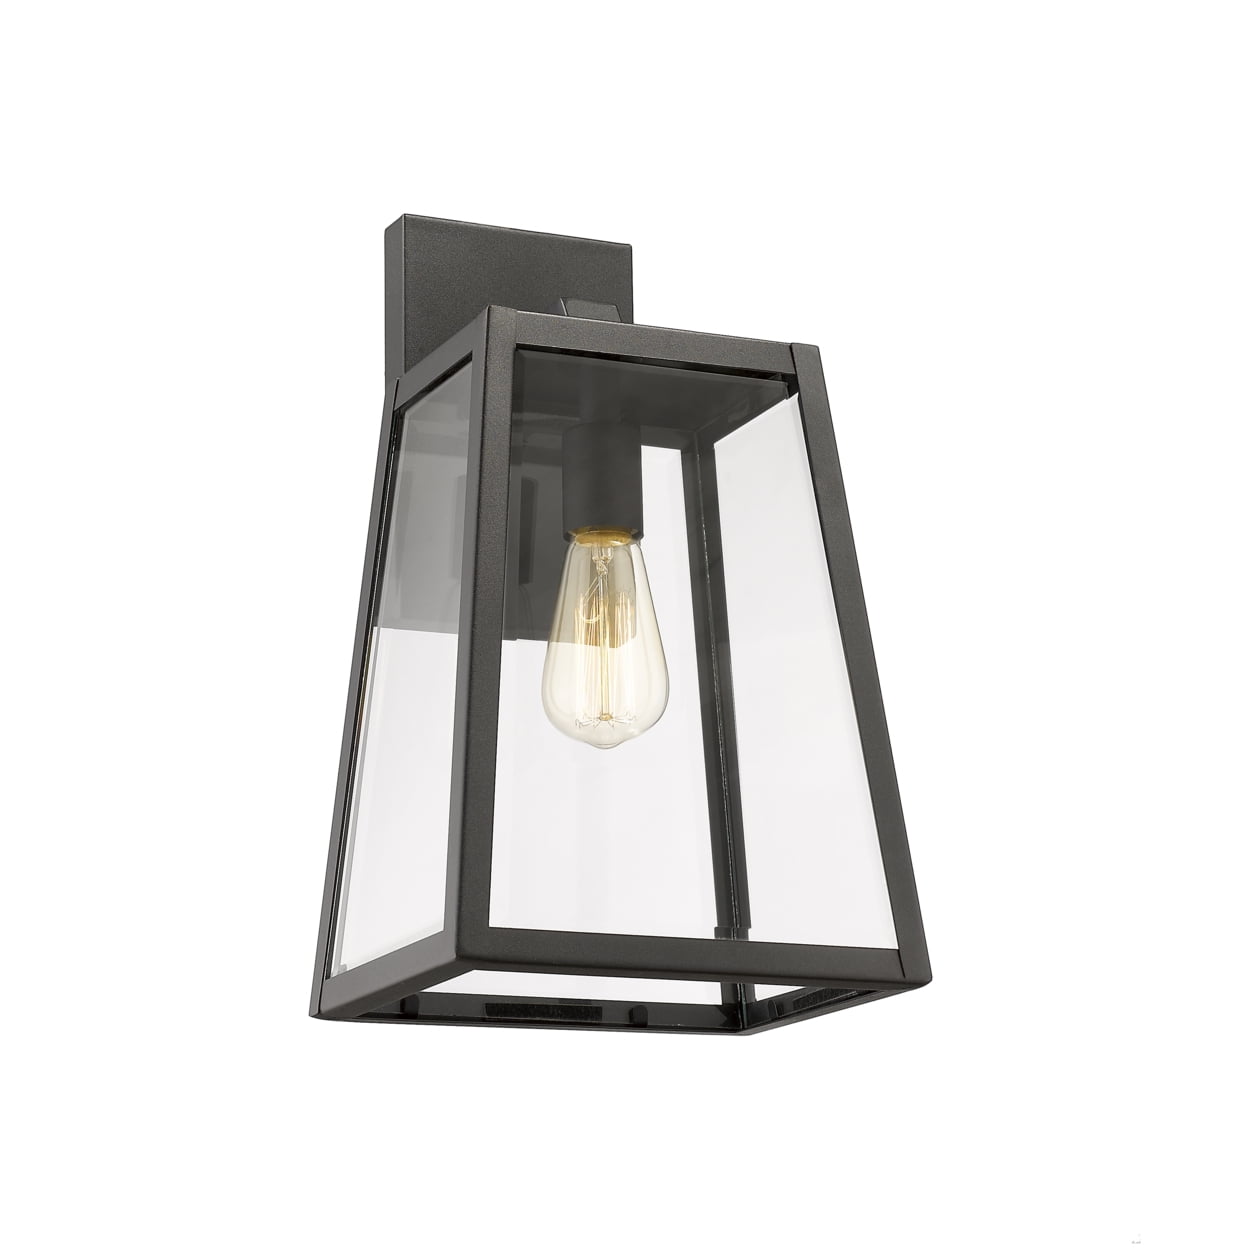 Picture of Chloe Lighting CH22034BK16-OD1 Xandra Industrial 1 Light Textured Black Outdoor Wall Sconce - 16 in.